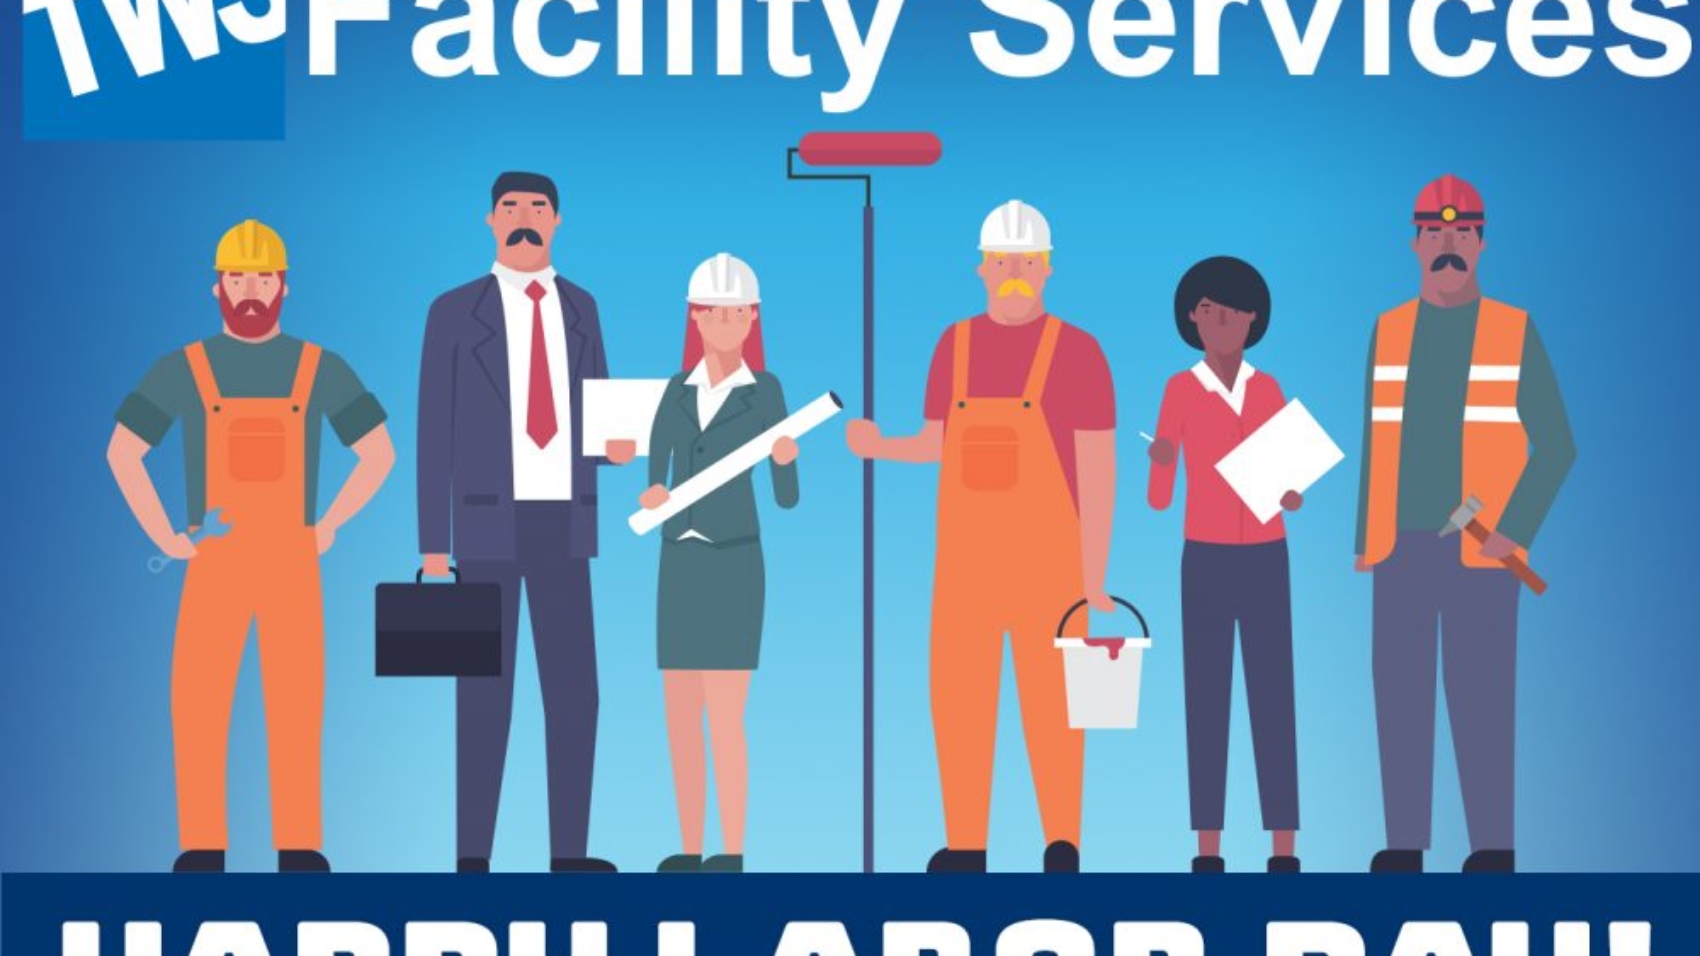 laborday_2019_facility_service_best